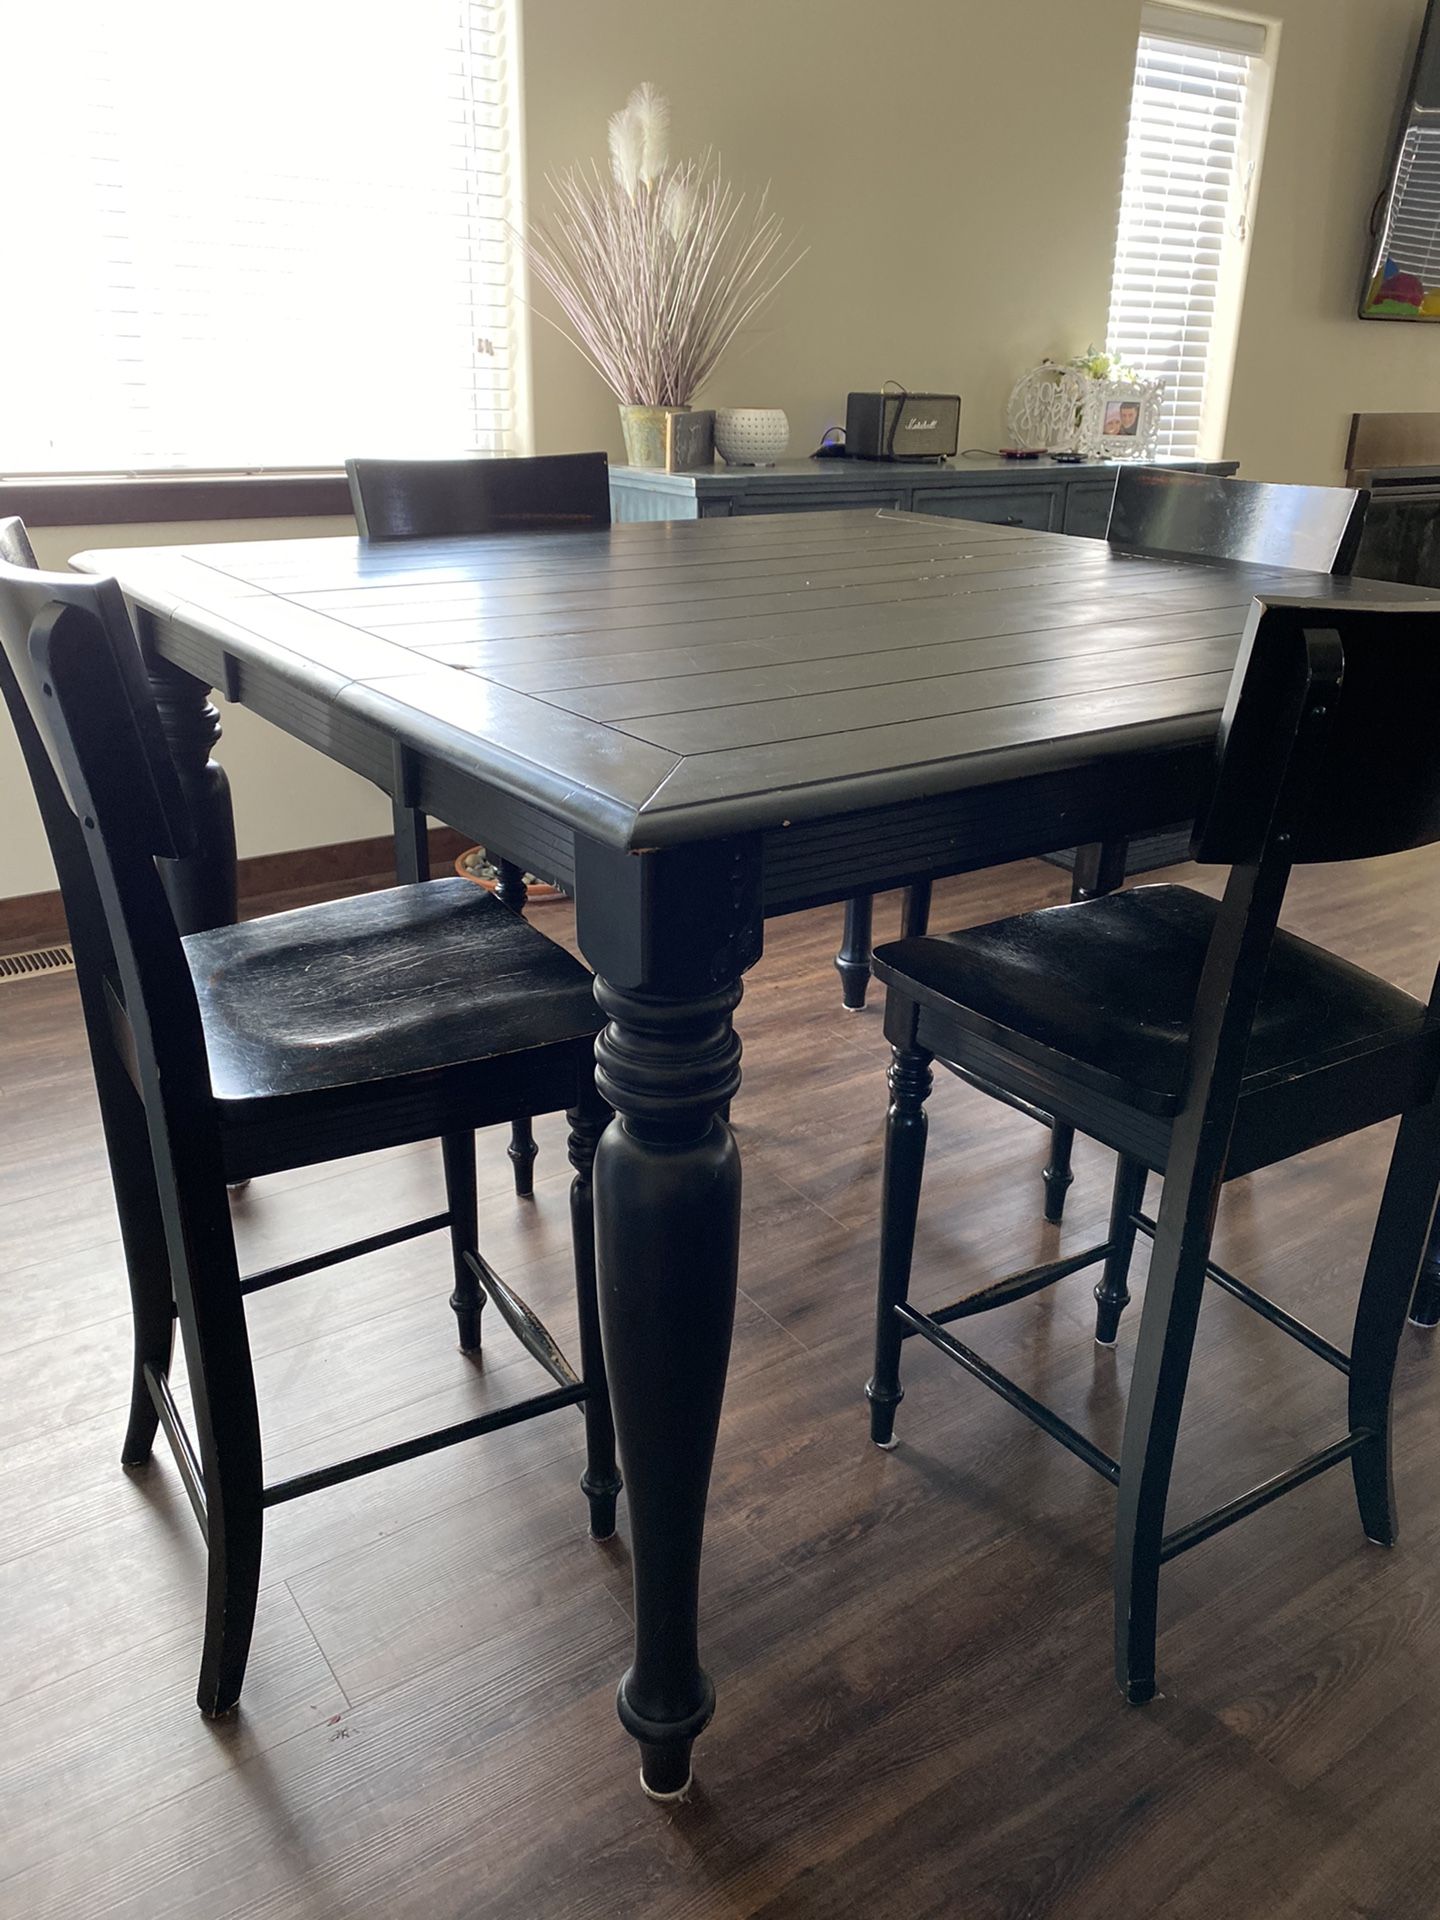 Solid wood dinner table